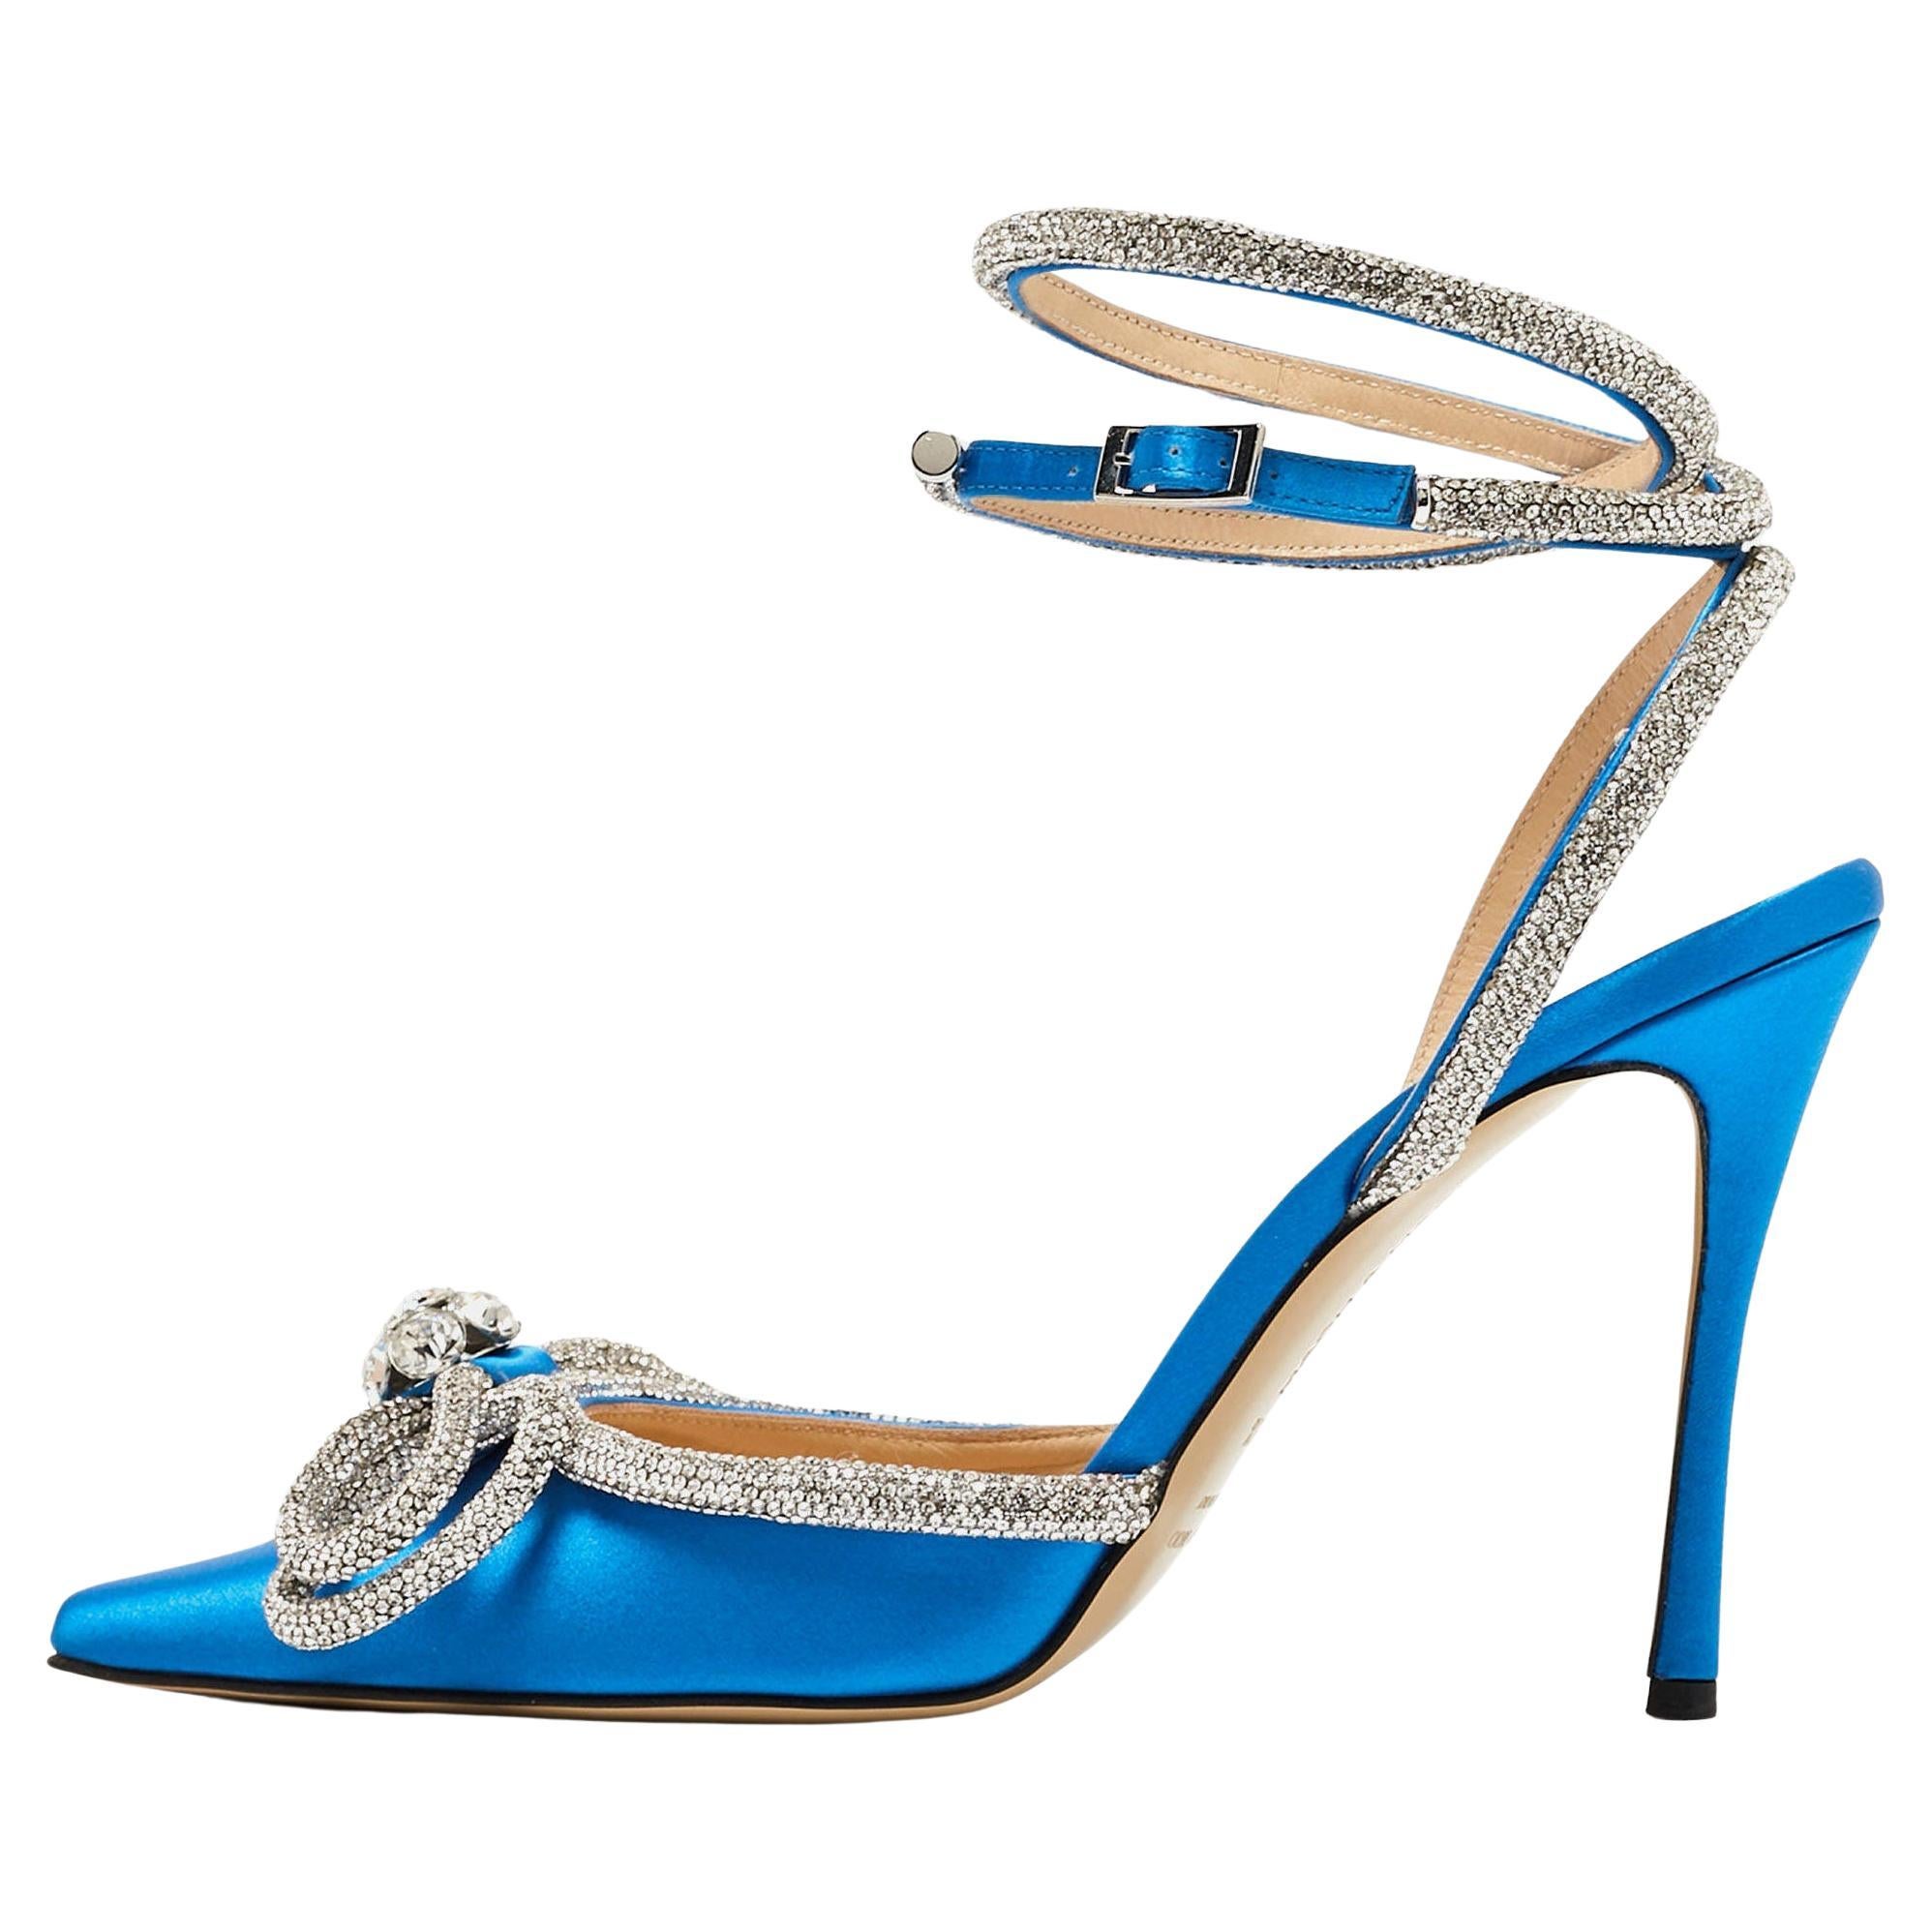 Mach & Mach Blue Satin Crystal Embellished Ankle Wrap Pointed Toe Pumps Sze 39.5